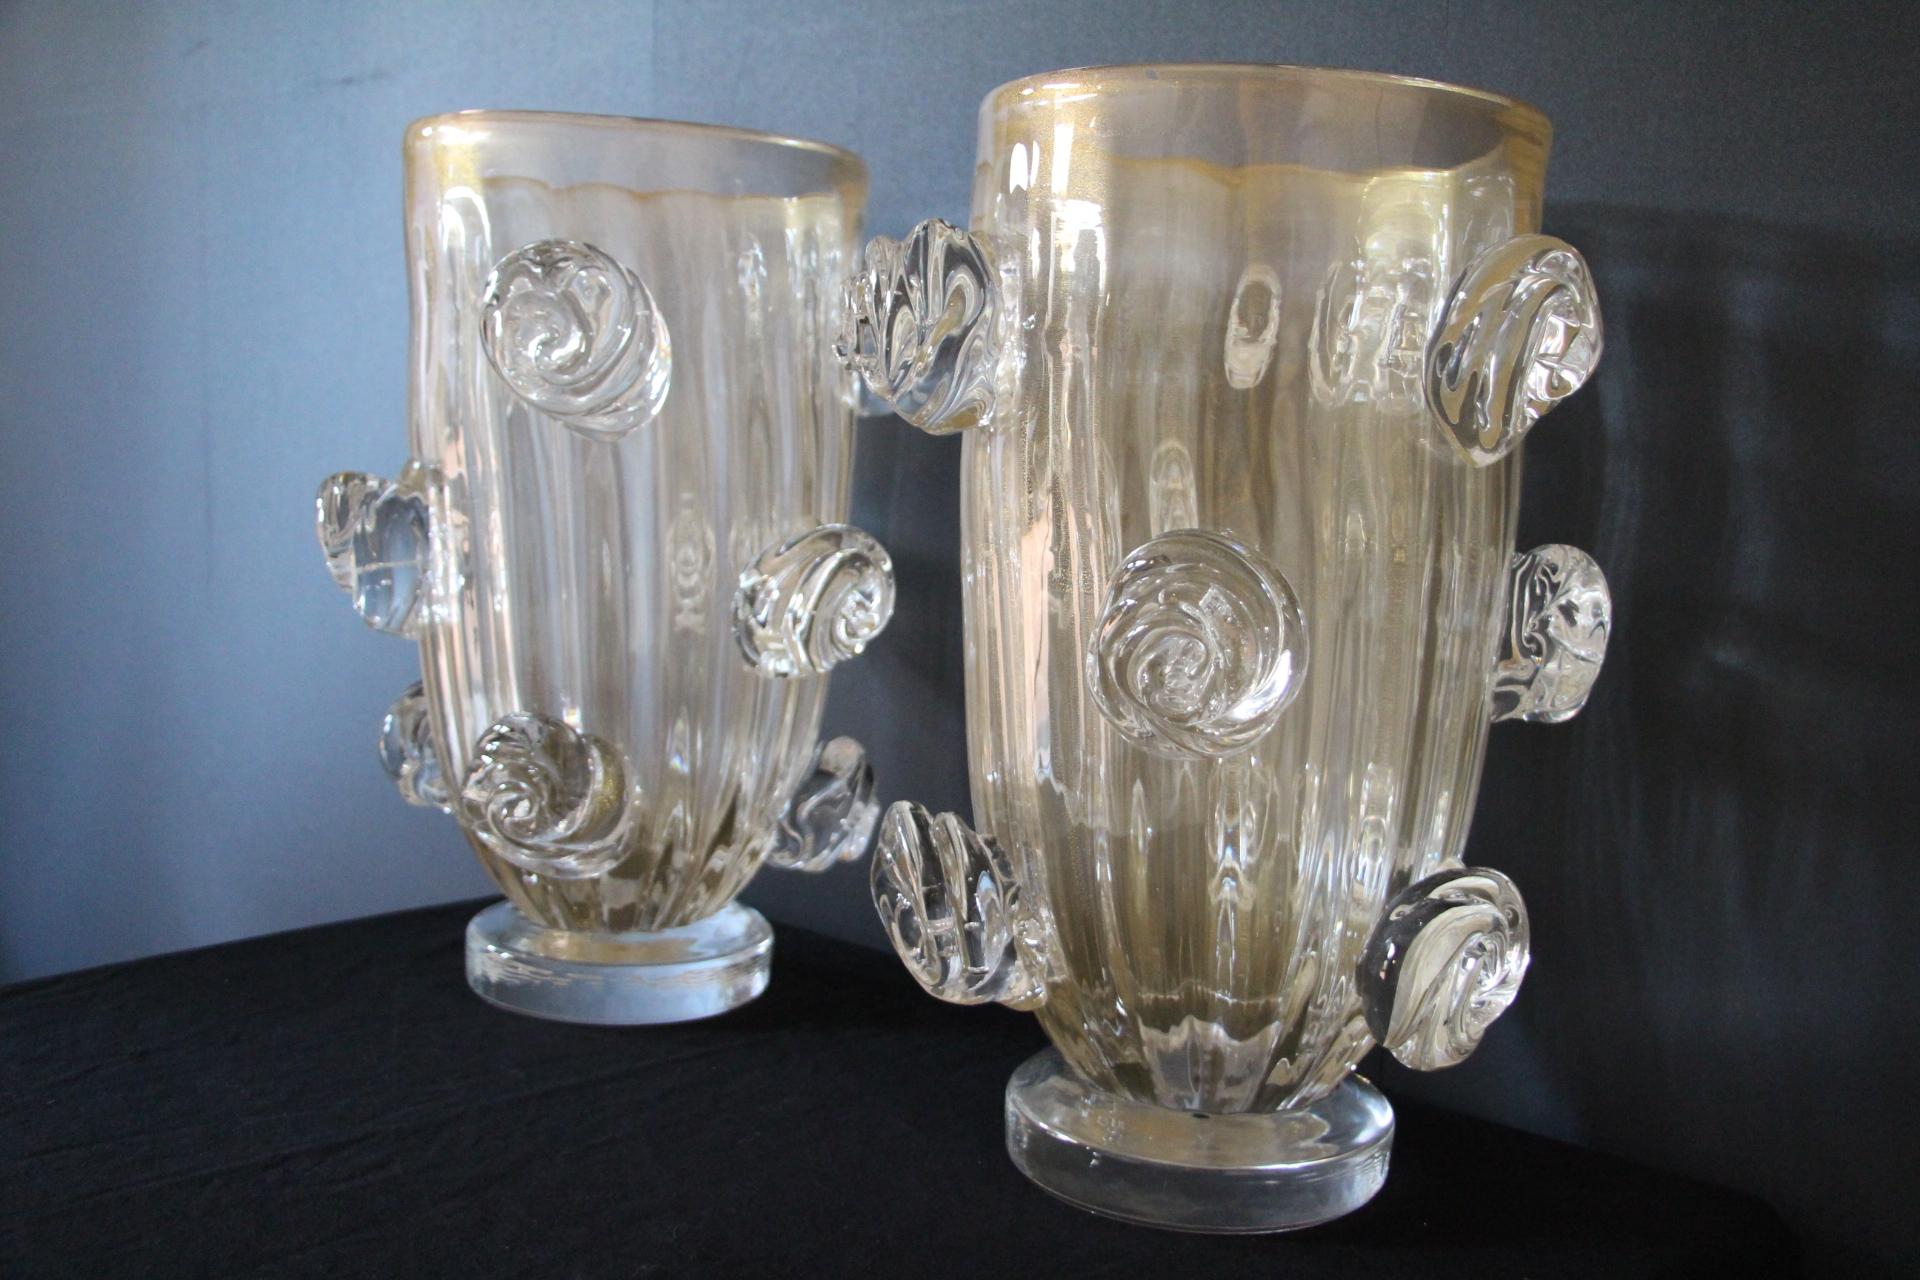 20th Century Pair of Large Golden Murano Glass Vases With Roses Decor by Costantini For Sale